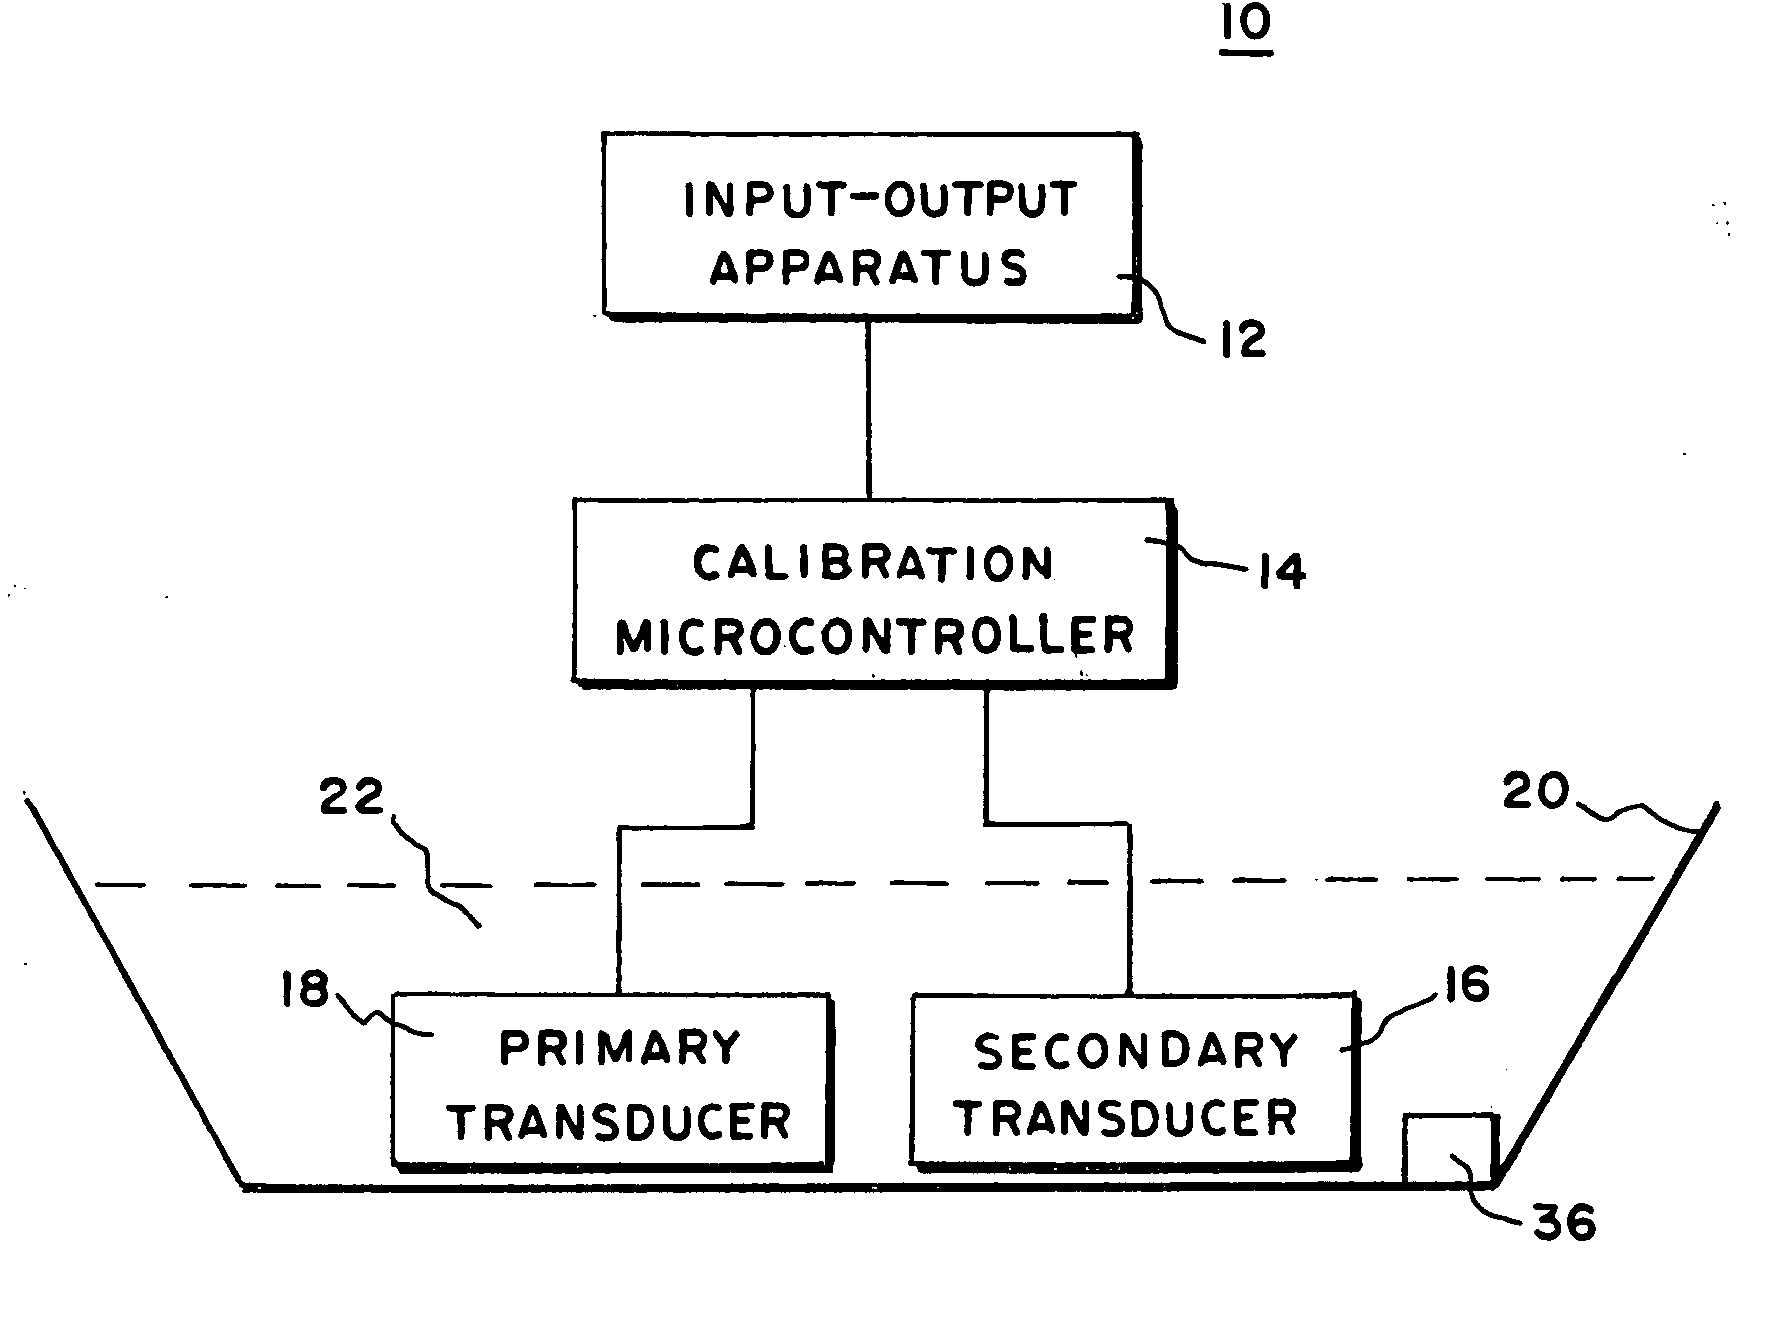 Measuring apparatuses and methods of using them